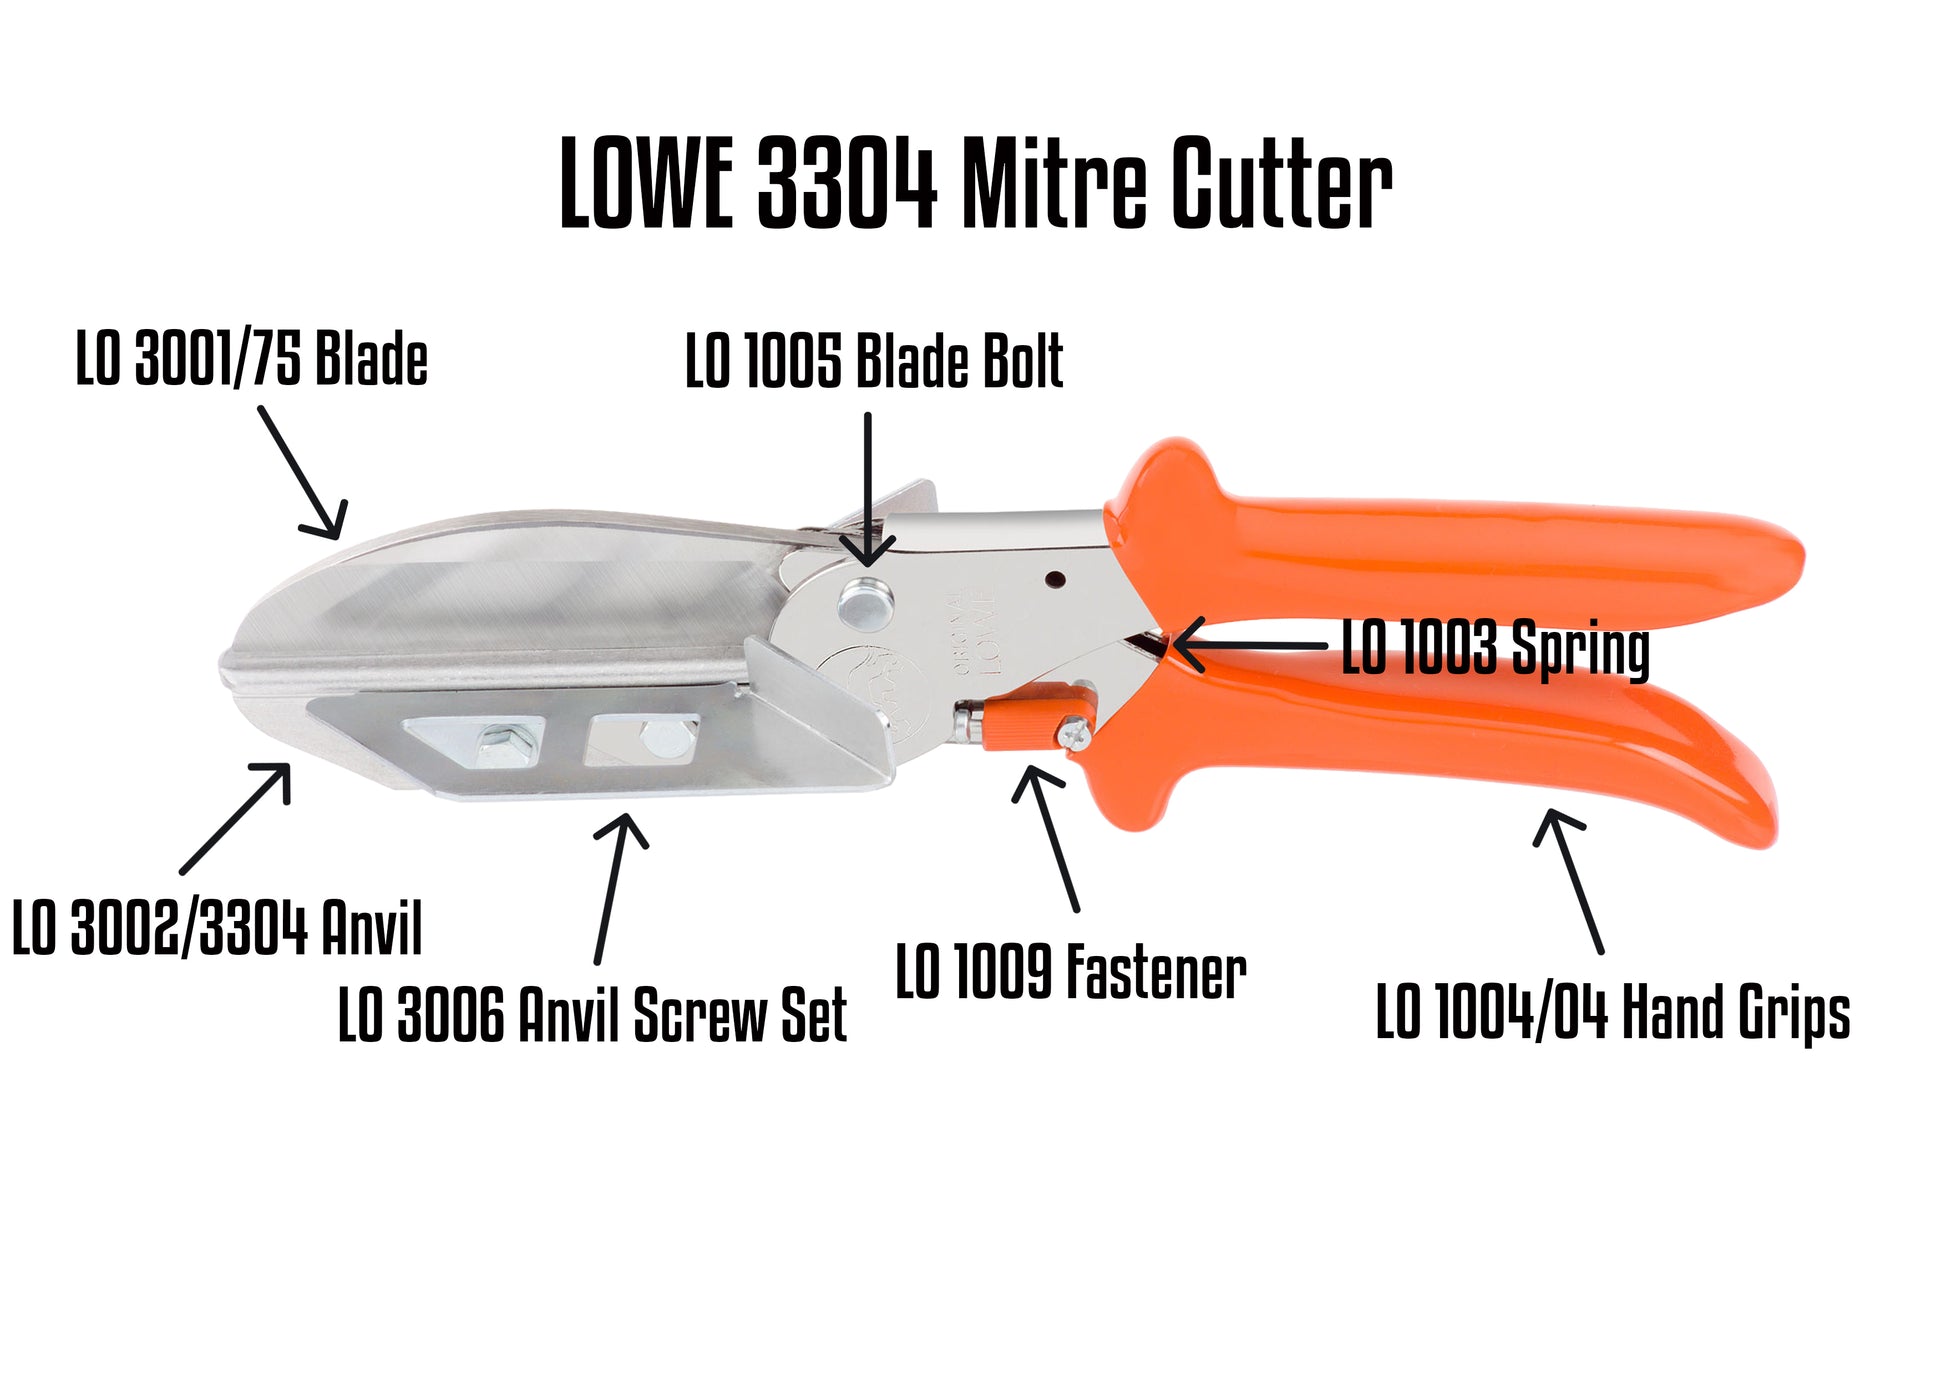 Lowe 3304 Parts Guide